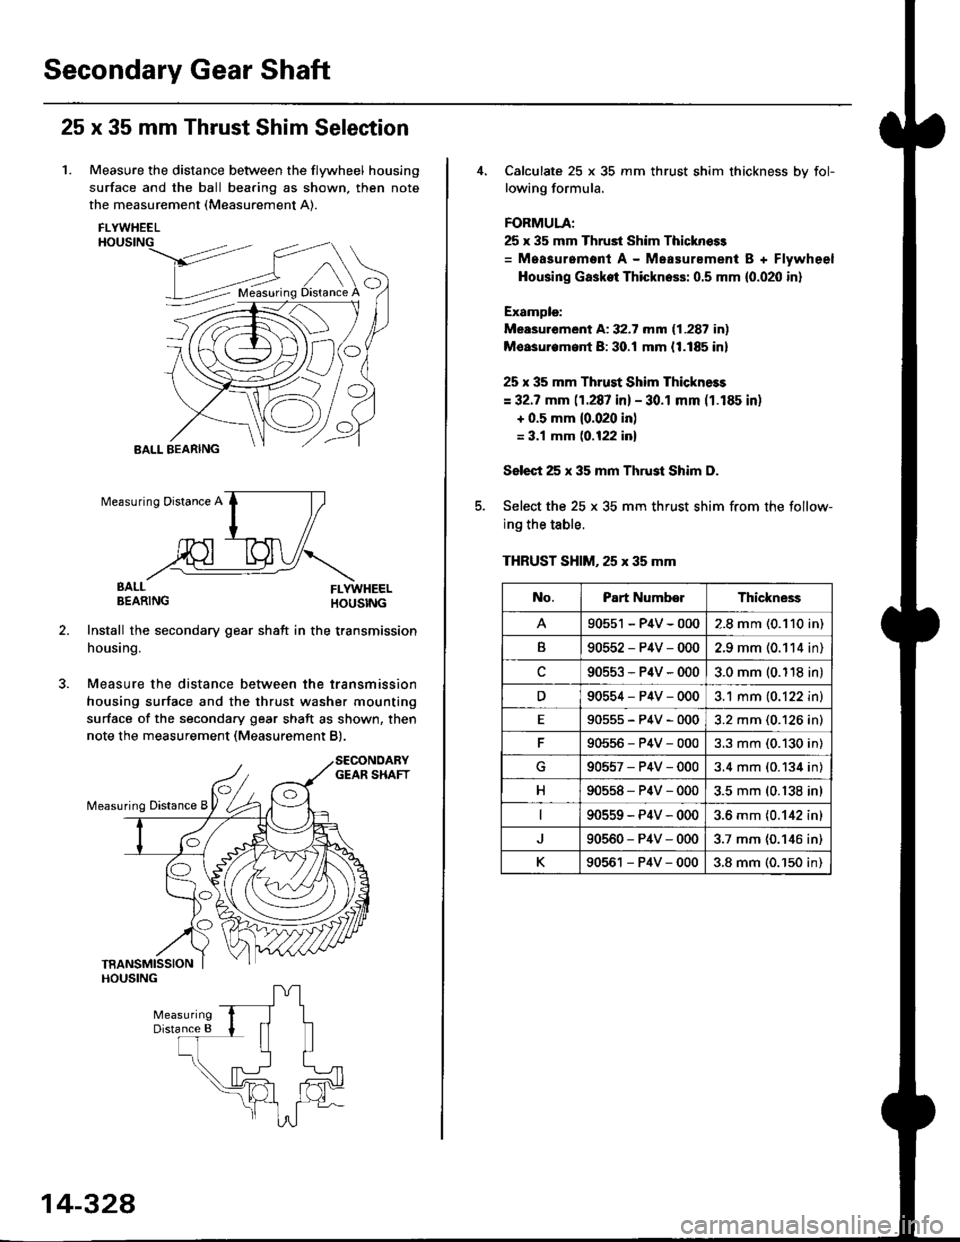 HONDA CIVIC 1996 6.G Workshop Manual Secondary Gear Shaft
25 x 35 mm Thrust Shim Selection
1. Measure the distance between the flywheel housing
surface and the ball bearing as shown, then note
the measurement (Measurement A).
FLYWHEELHOU